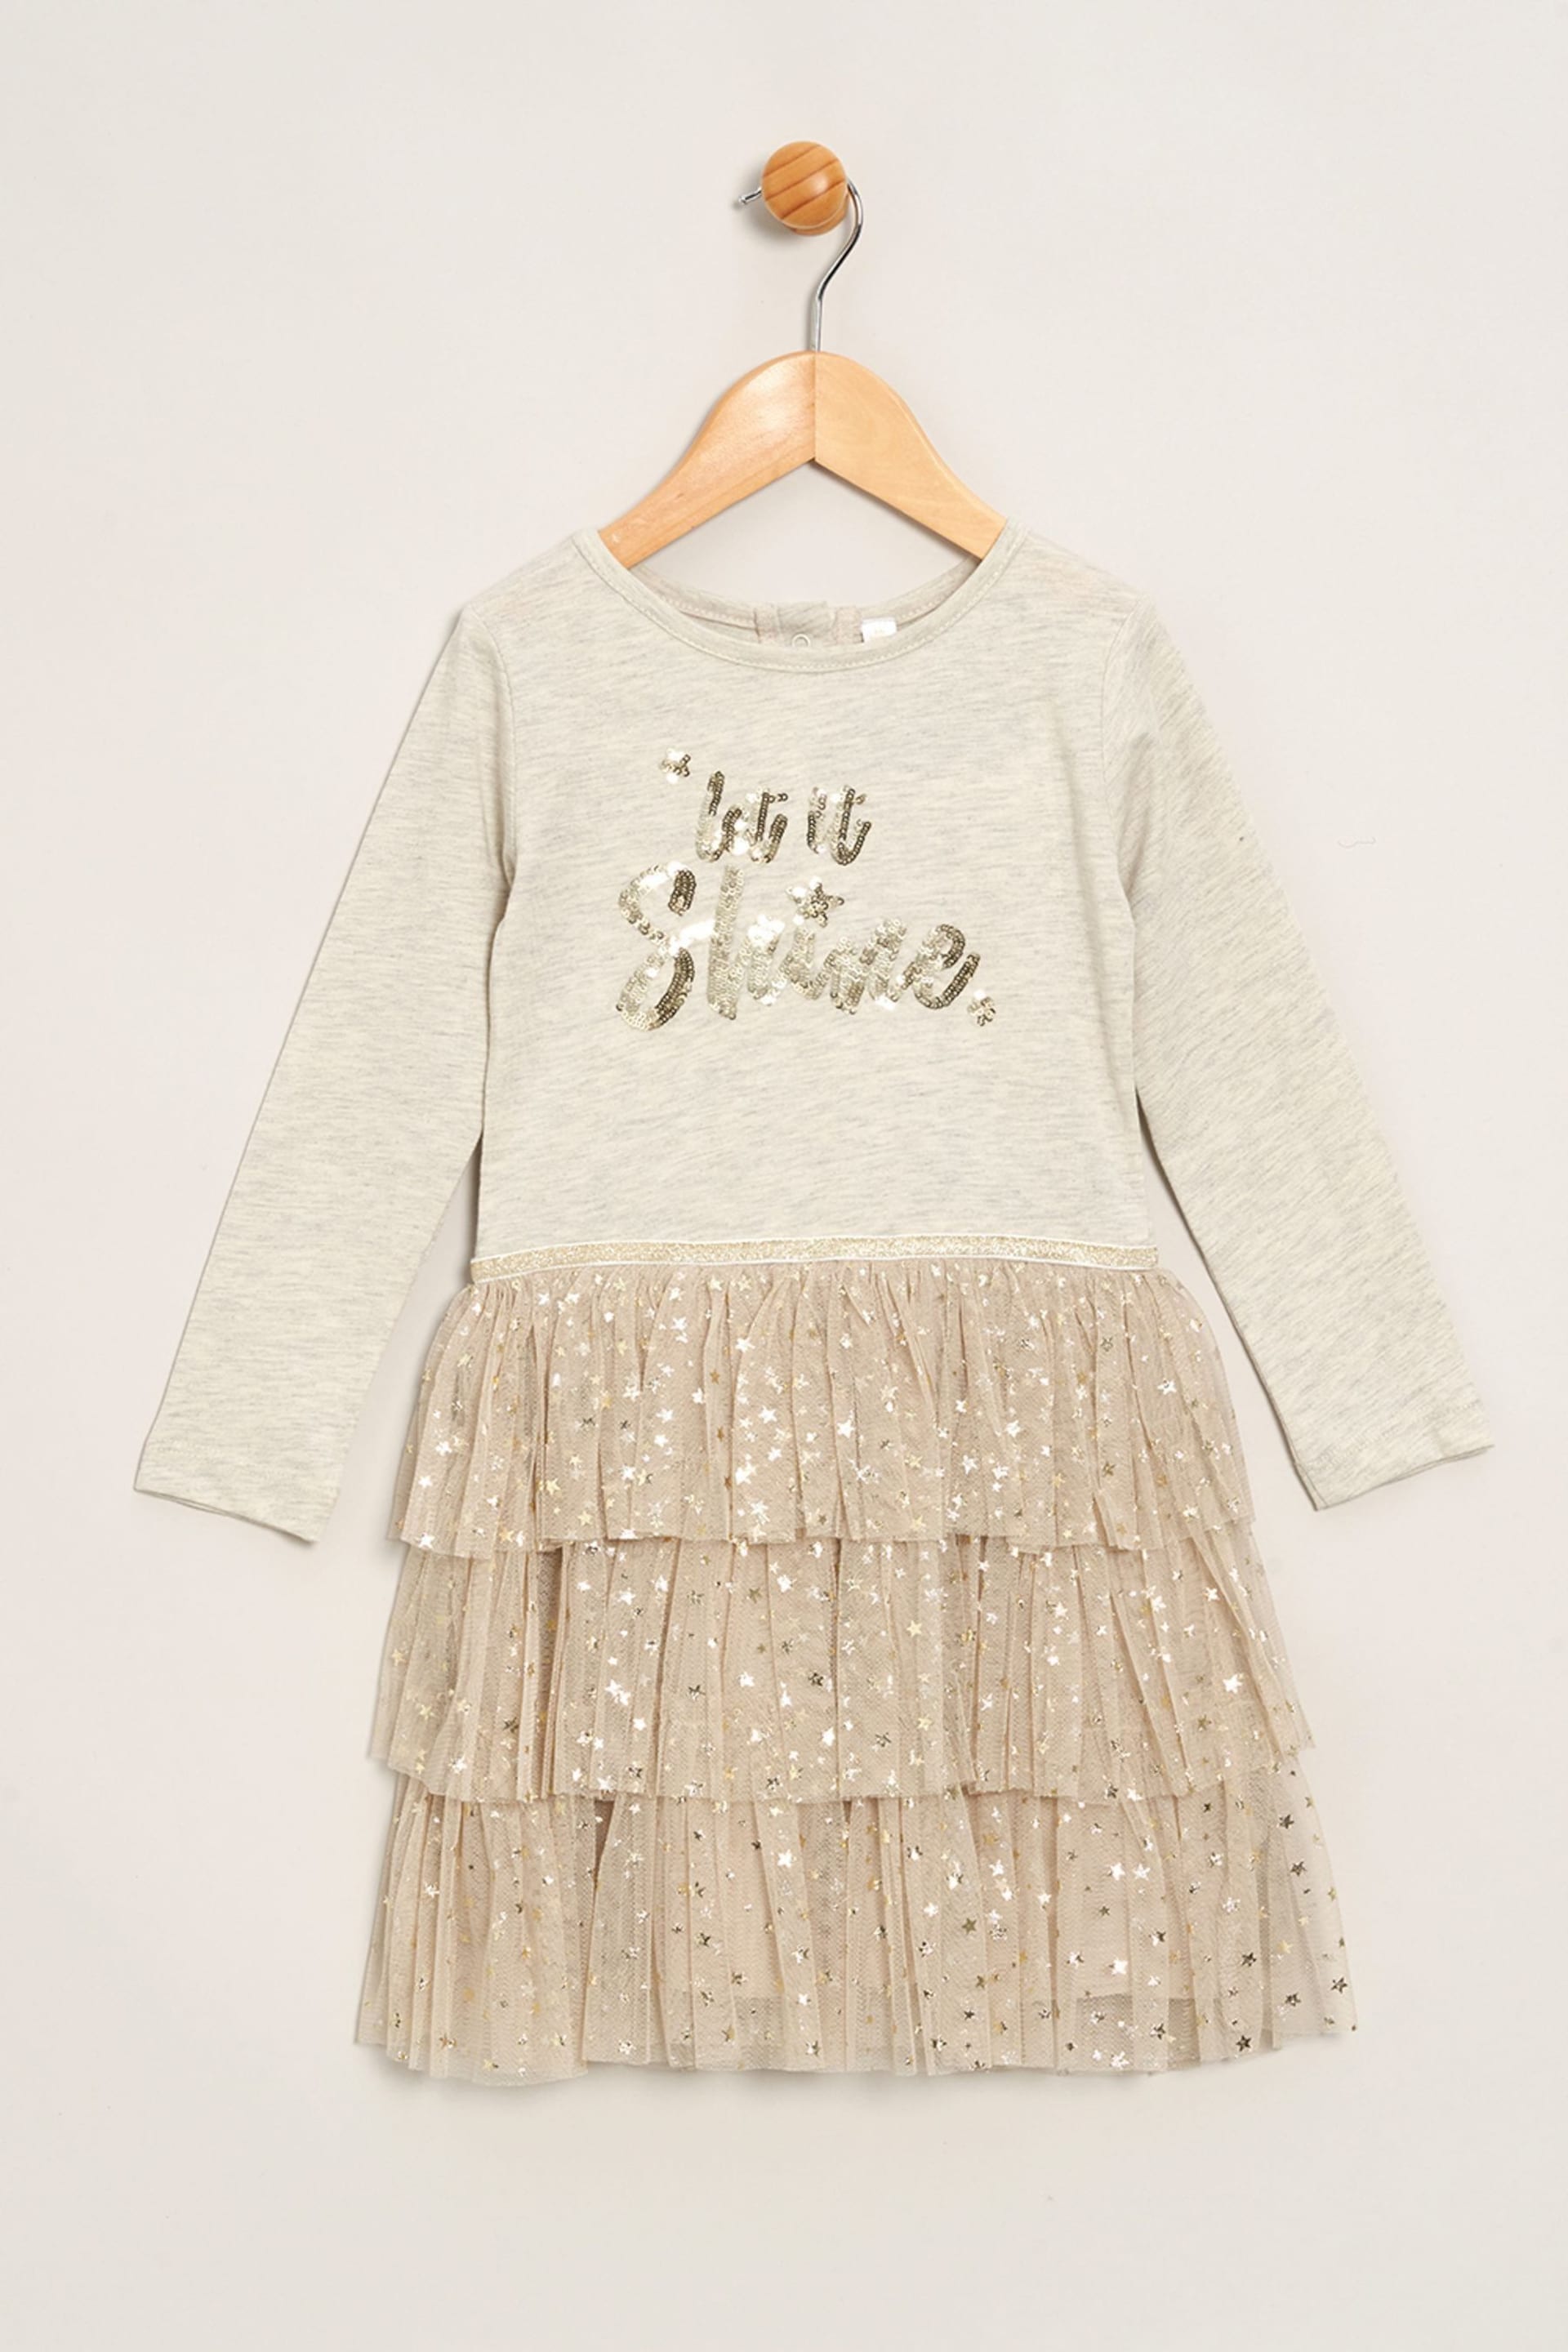 Miss Natural Long Sleeve 2-in-1 Style Sequin Detail Dress with Tutu Skirt - Image 1 of 3